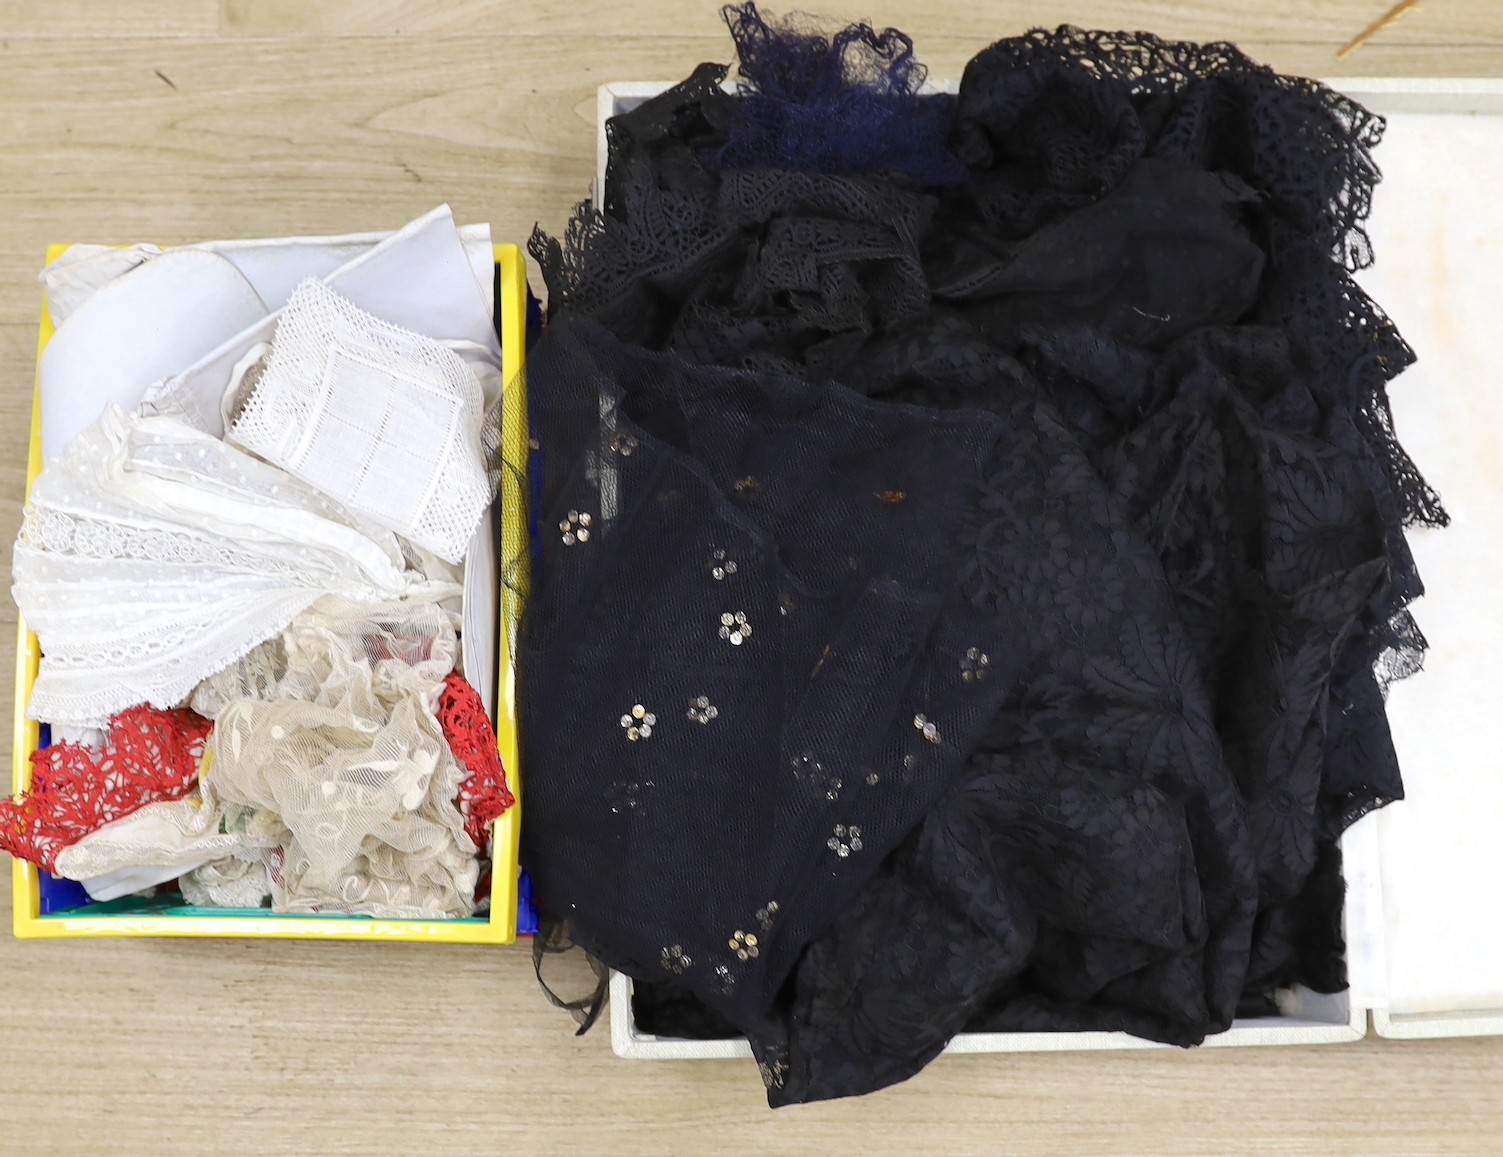 A suitcase of mixed 19th and 20th century black machine and bobbin laces, servants bonnets, cream lace, etc